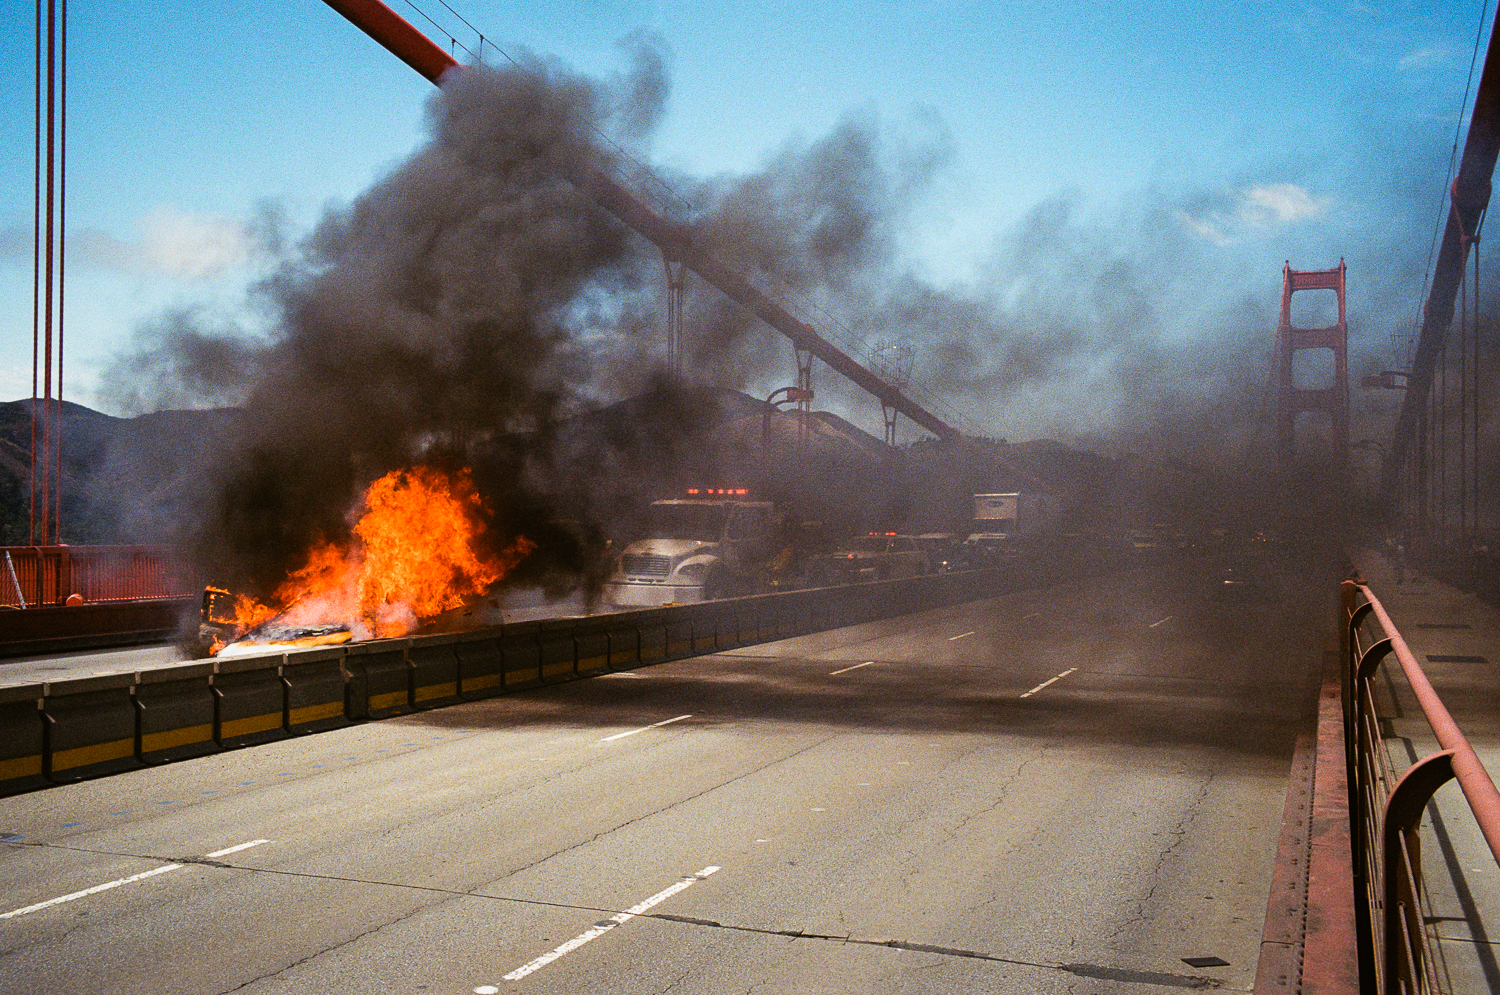 Emergency vehicles respond to a car on fire near the middle of the bridge in July 2020.